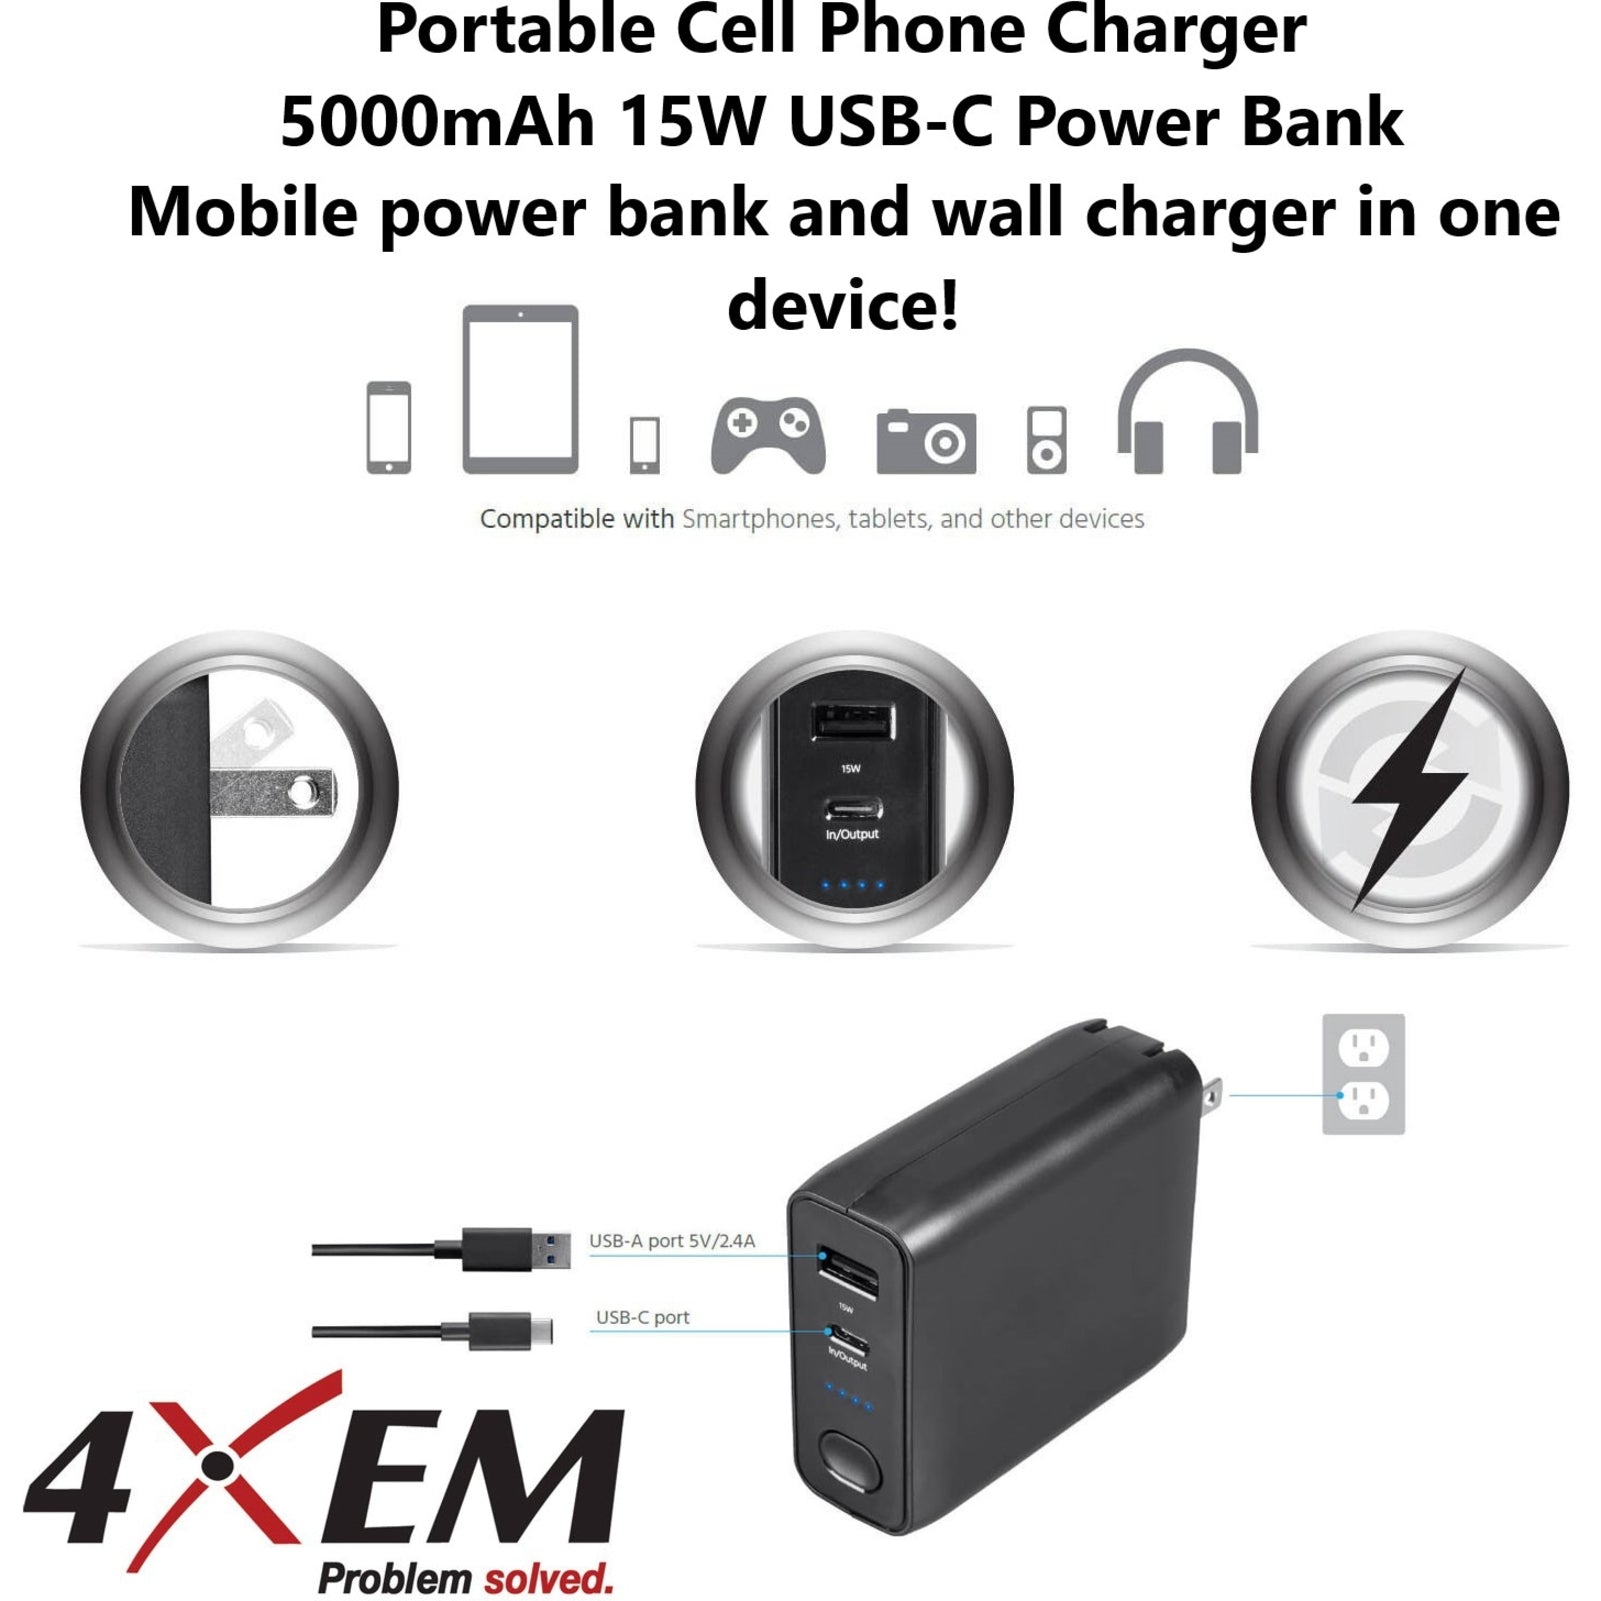 4XEM 4XCPC5000CHARGE 5000mAh Power Bank and Wall Charger Combo, Portable Mobile Charger for Camera, Smartphone, iPhone, Tablet PC, Headphone